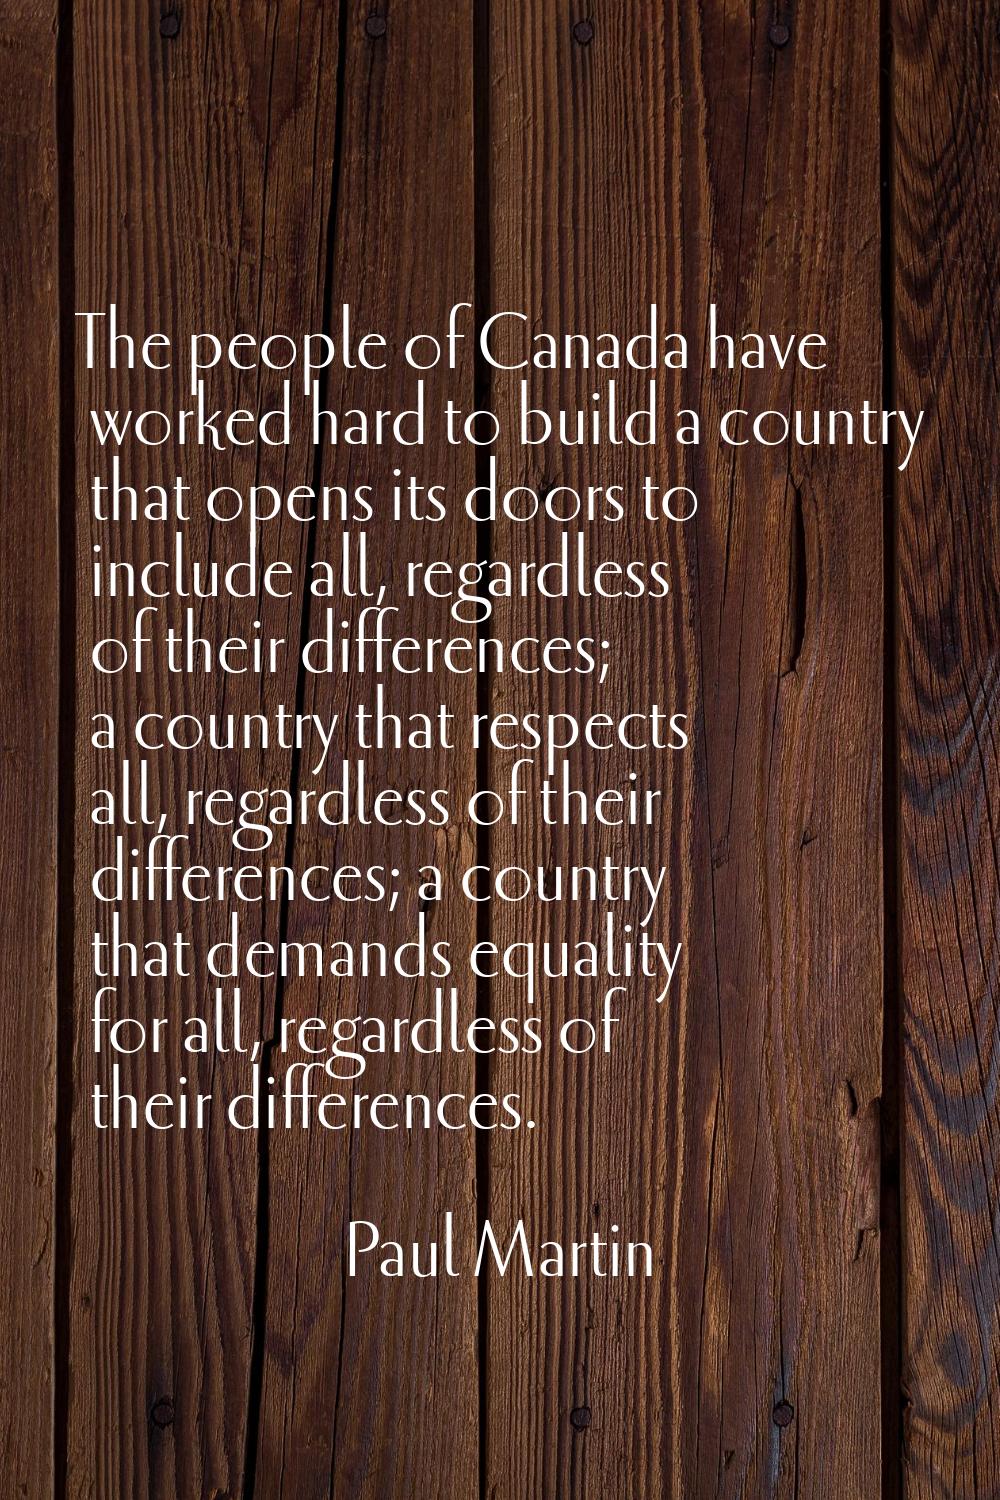 The people of Canada have worked hard to build a country that opens its doors to include all, regar